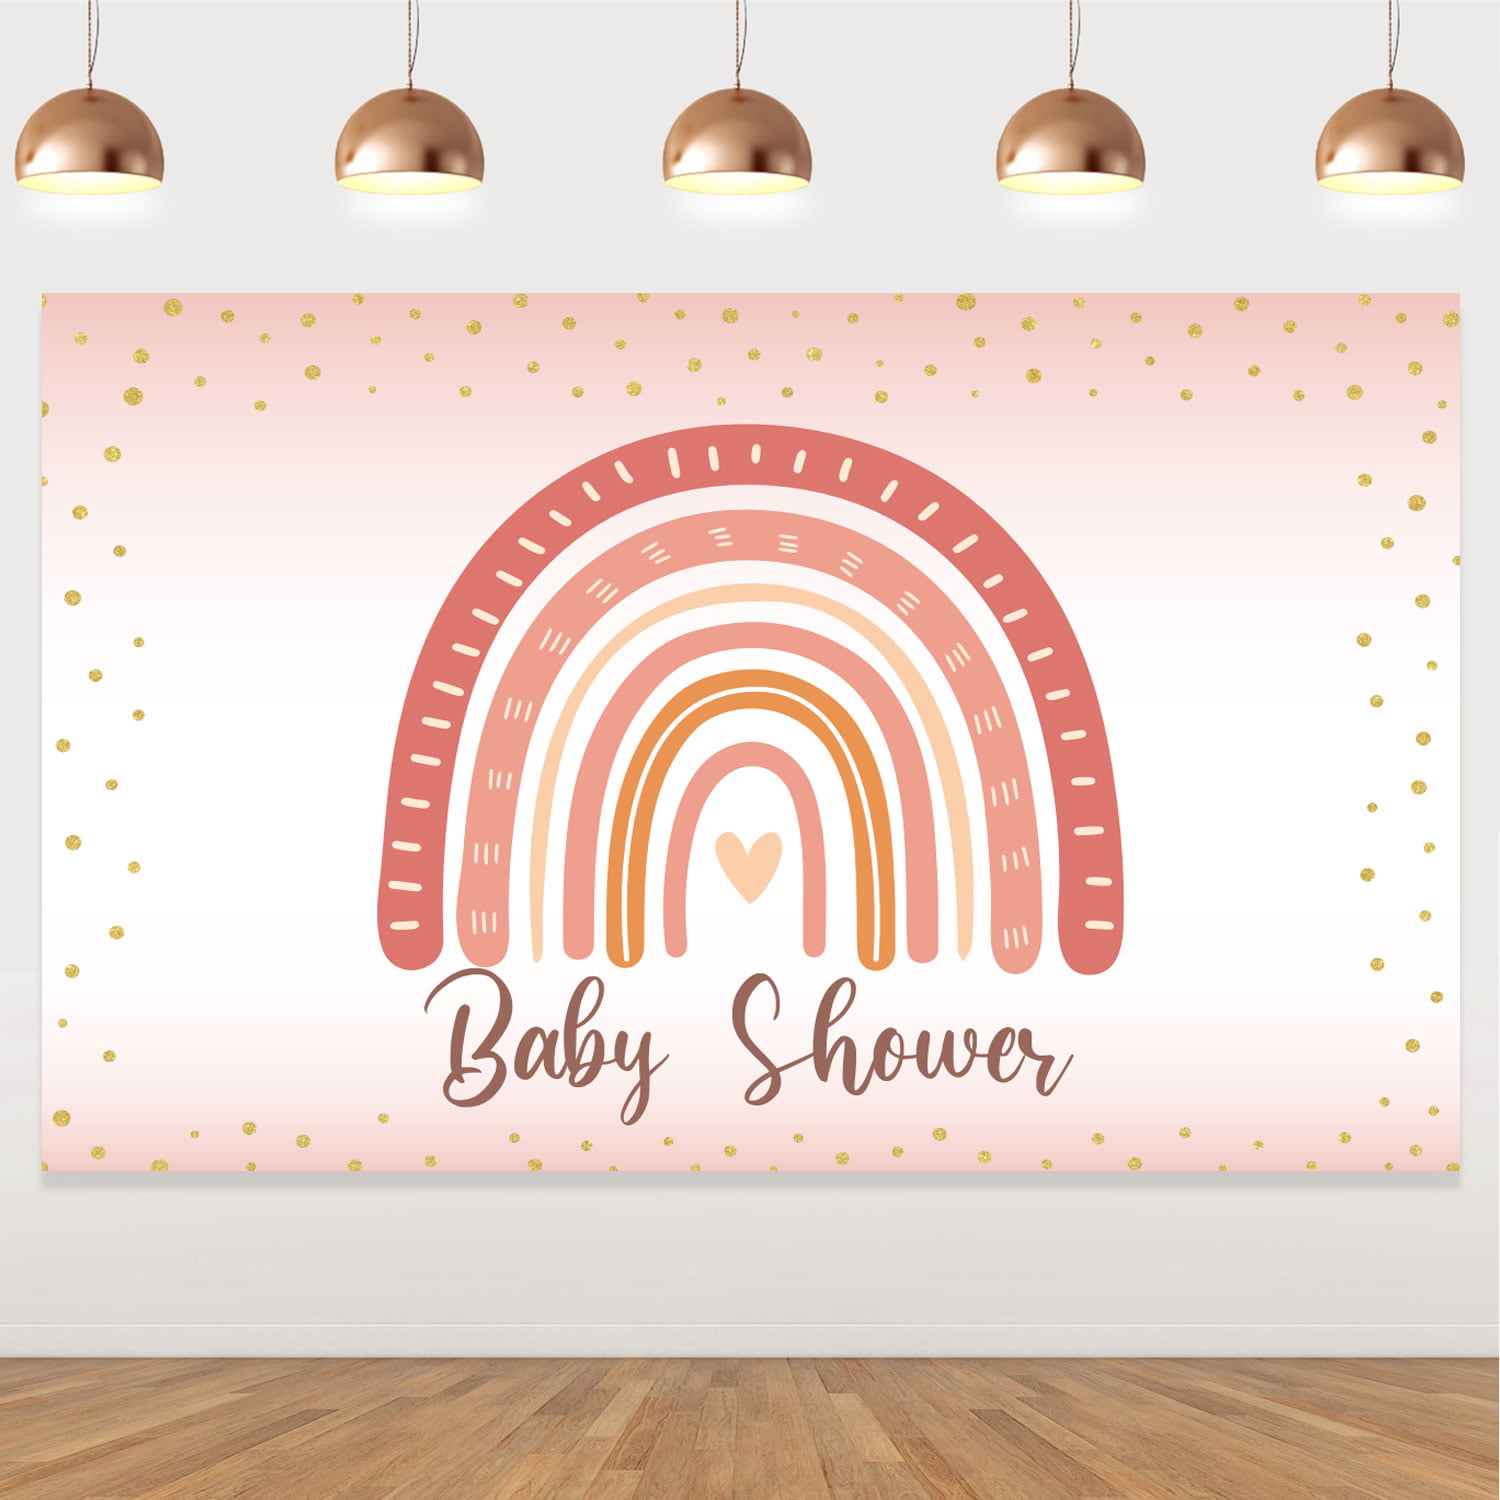 1* Boho Rainbow Baby Shower Backdrop Decorations, Boho Rainbow Backdrop  for Baby Girl's Birthday Bohemian Rainbow Theme Baby Shower Party Supplies Background  Decor 